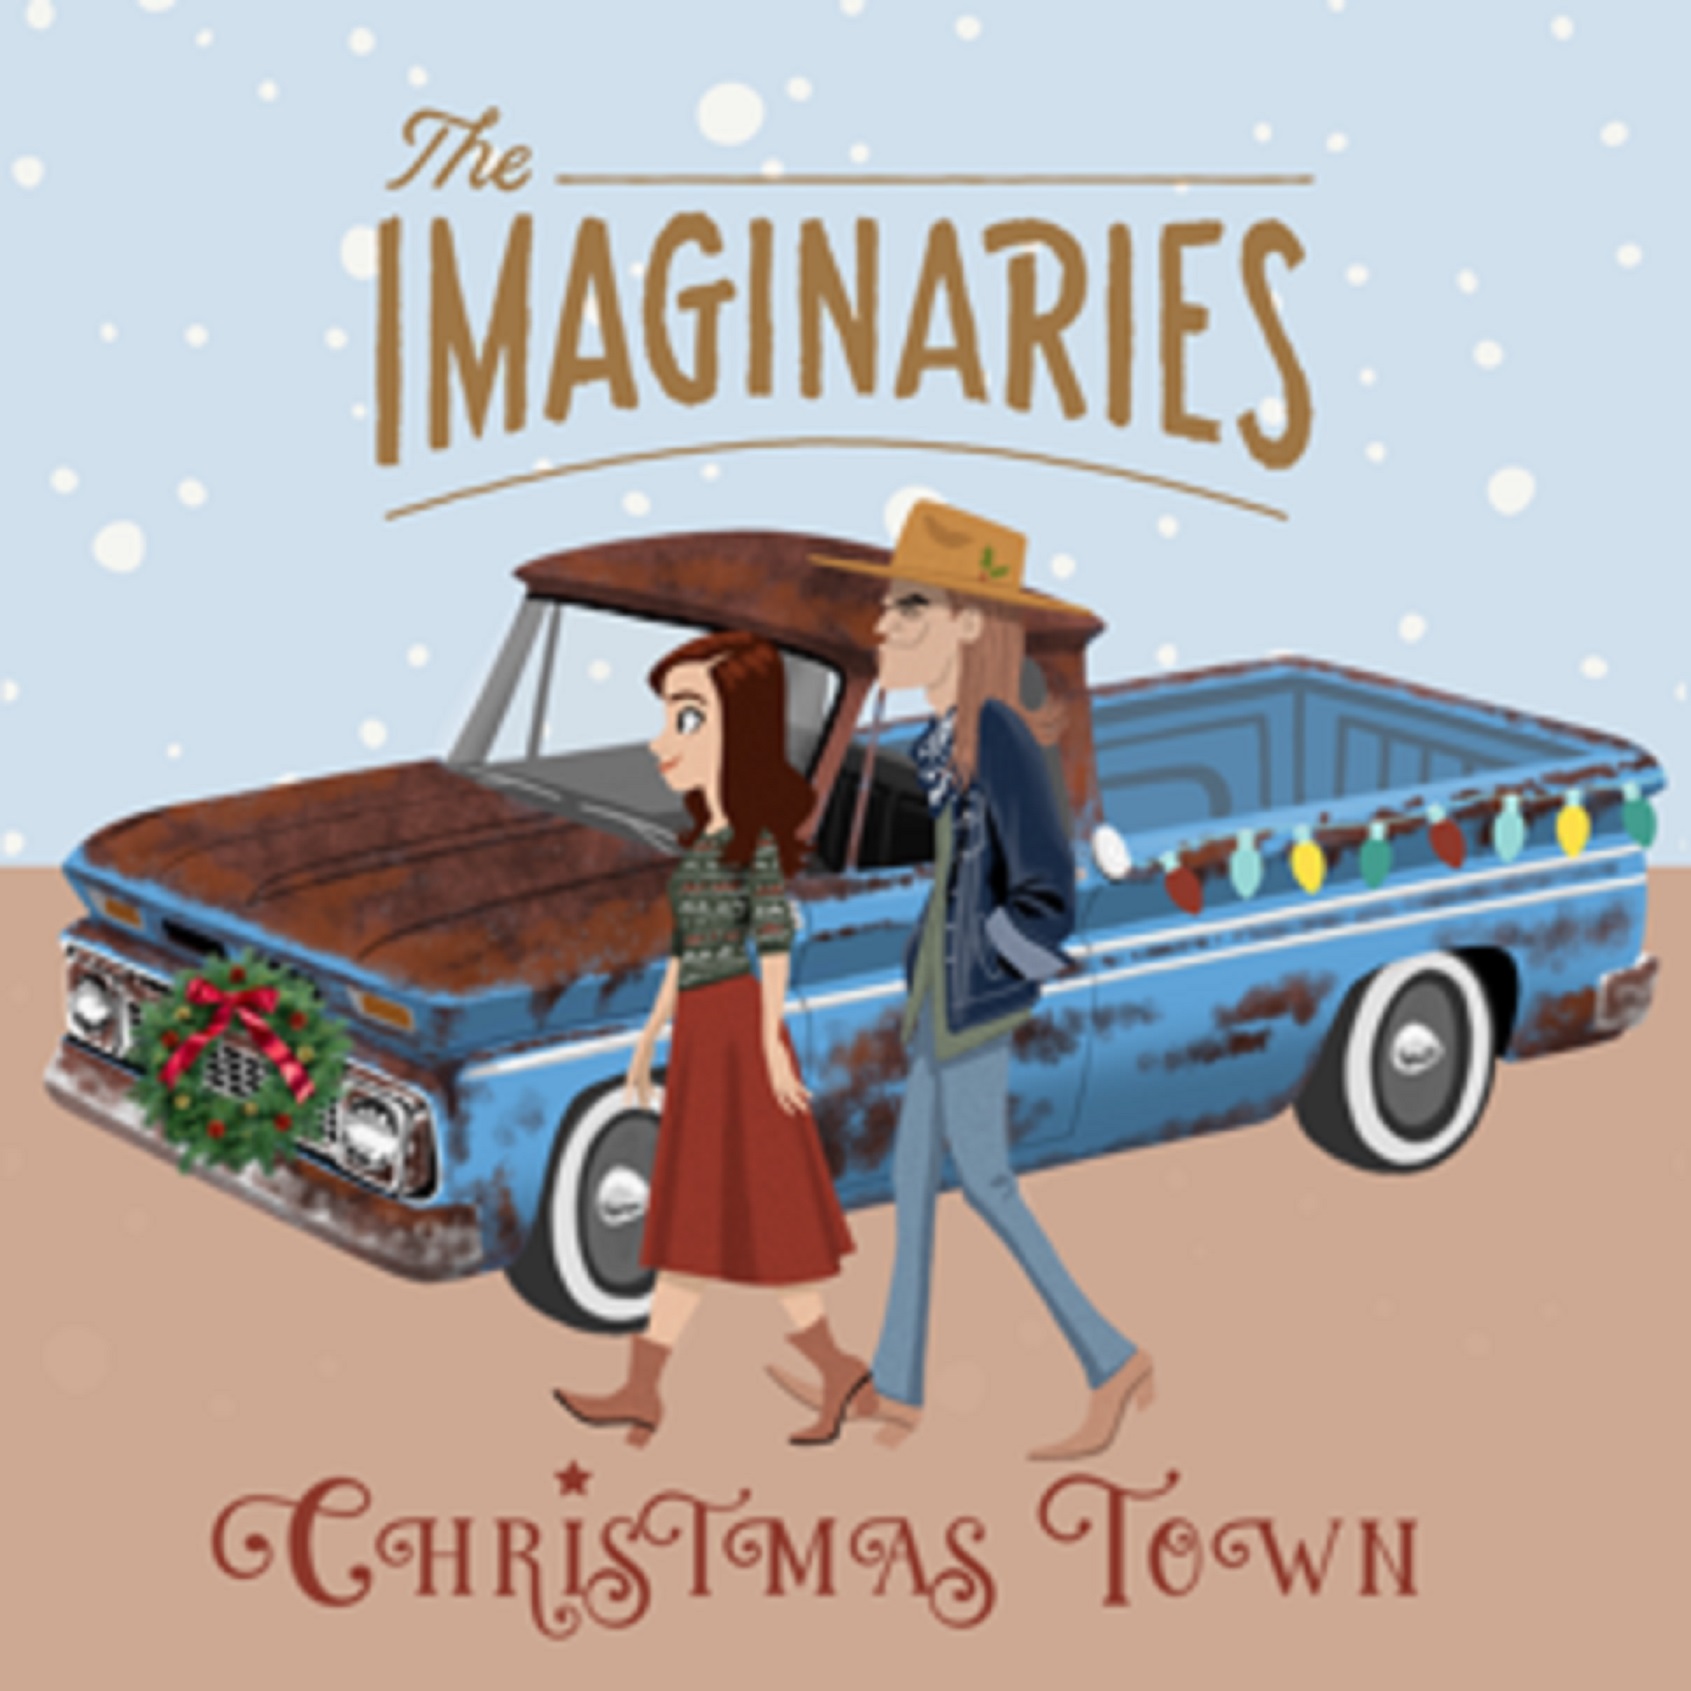 The Imaginaries Release "Christmas Town" Today